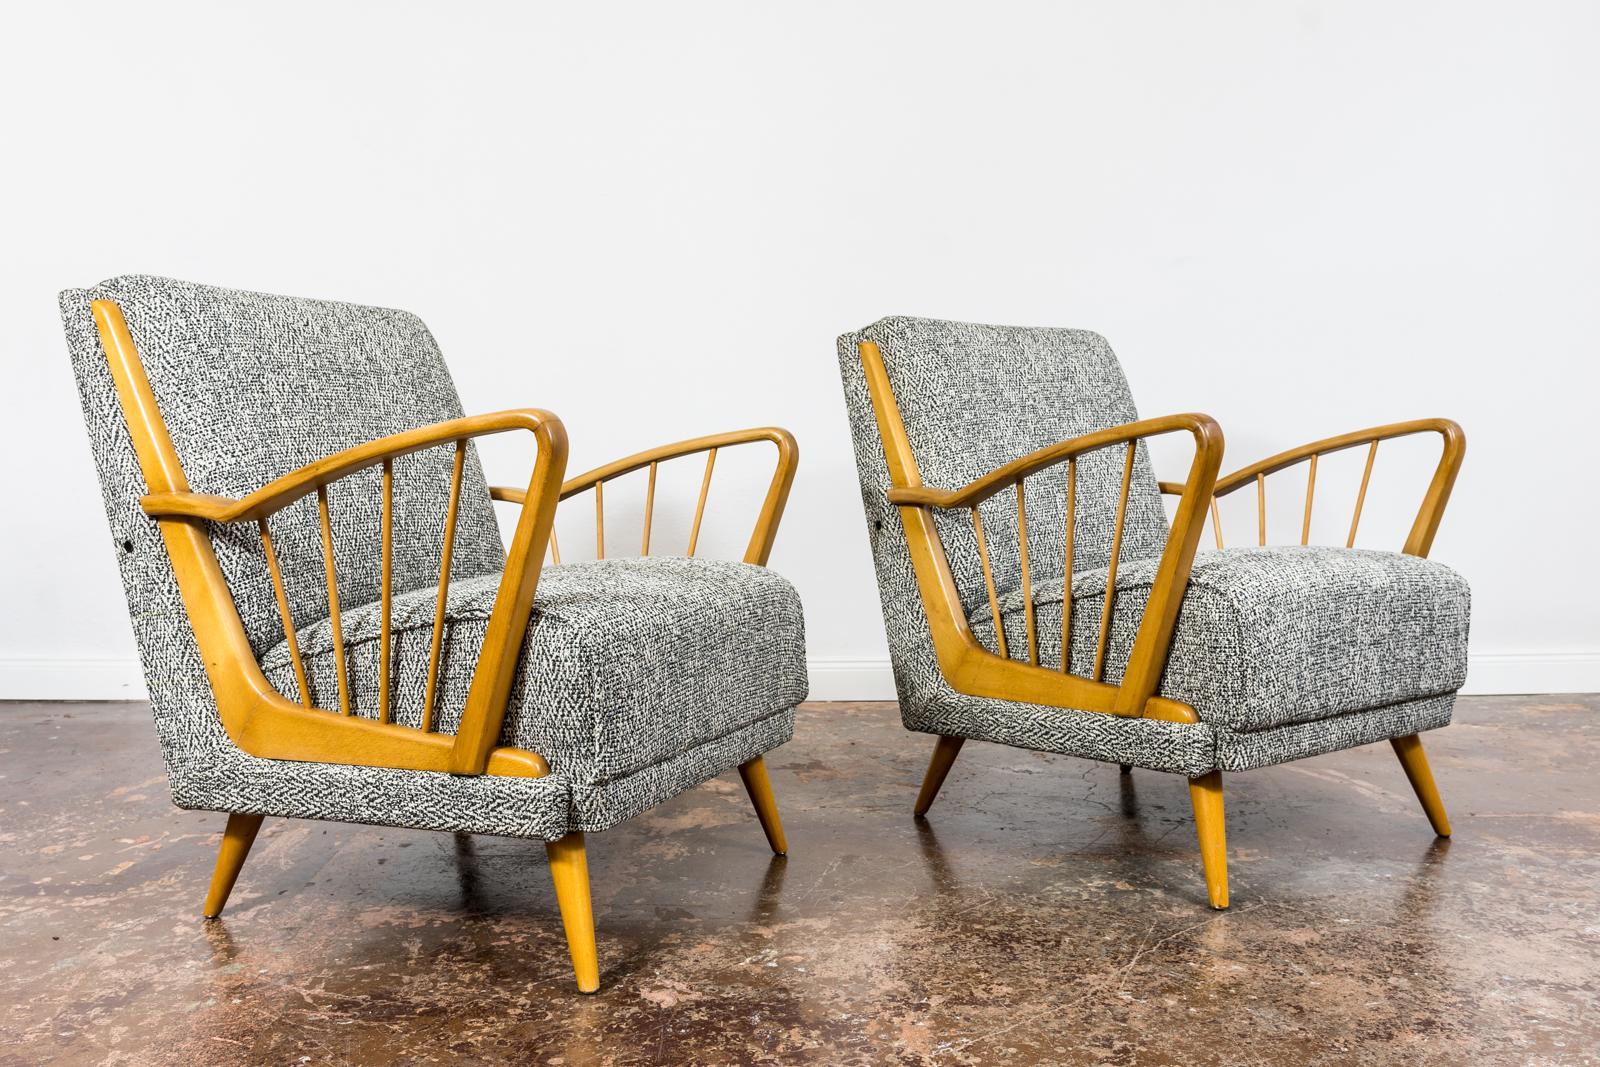 Pair Of Mid-Century Armchairs, 1950's, Germany For Sale 6